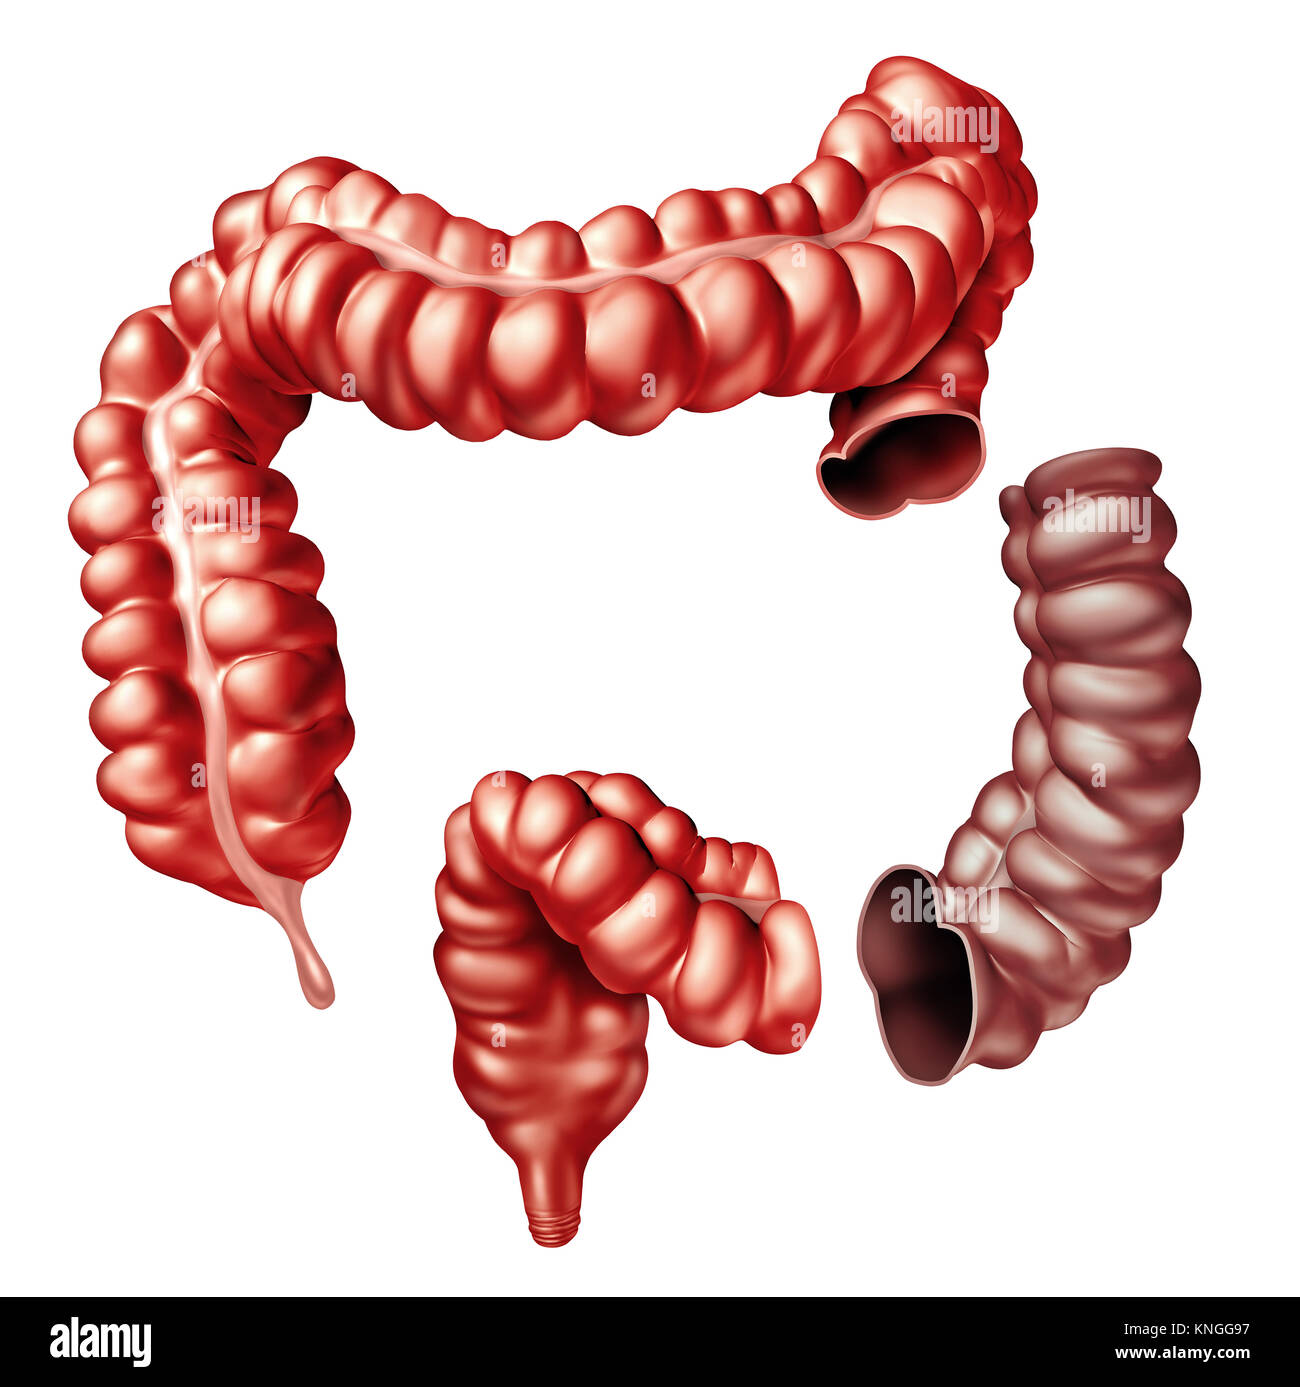 Colectomy colon surgery medical procedure removing a portion of the large intestine as a 3D intestine. Stock Photo